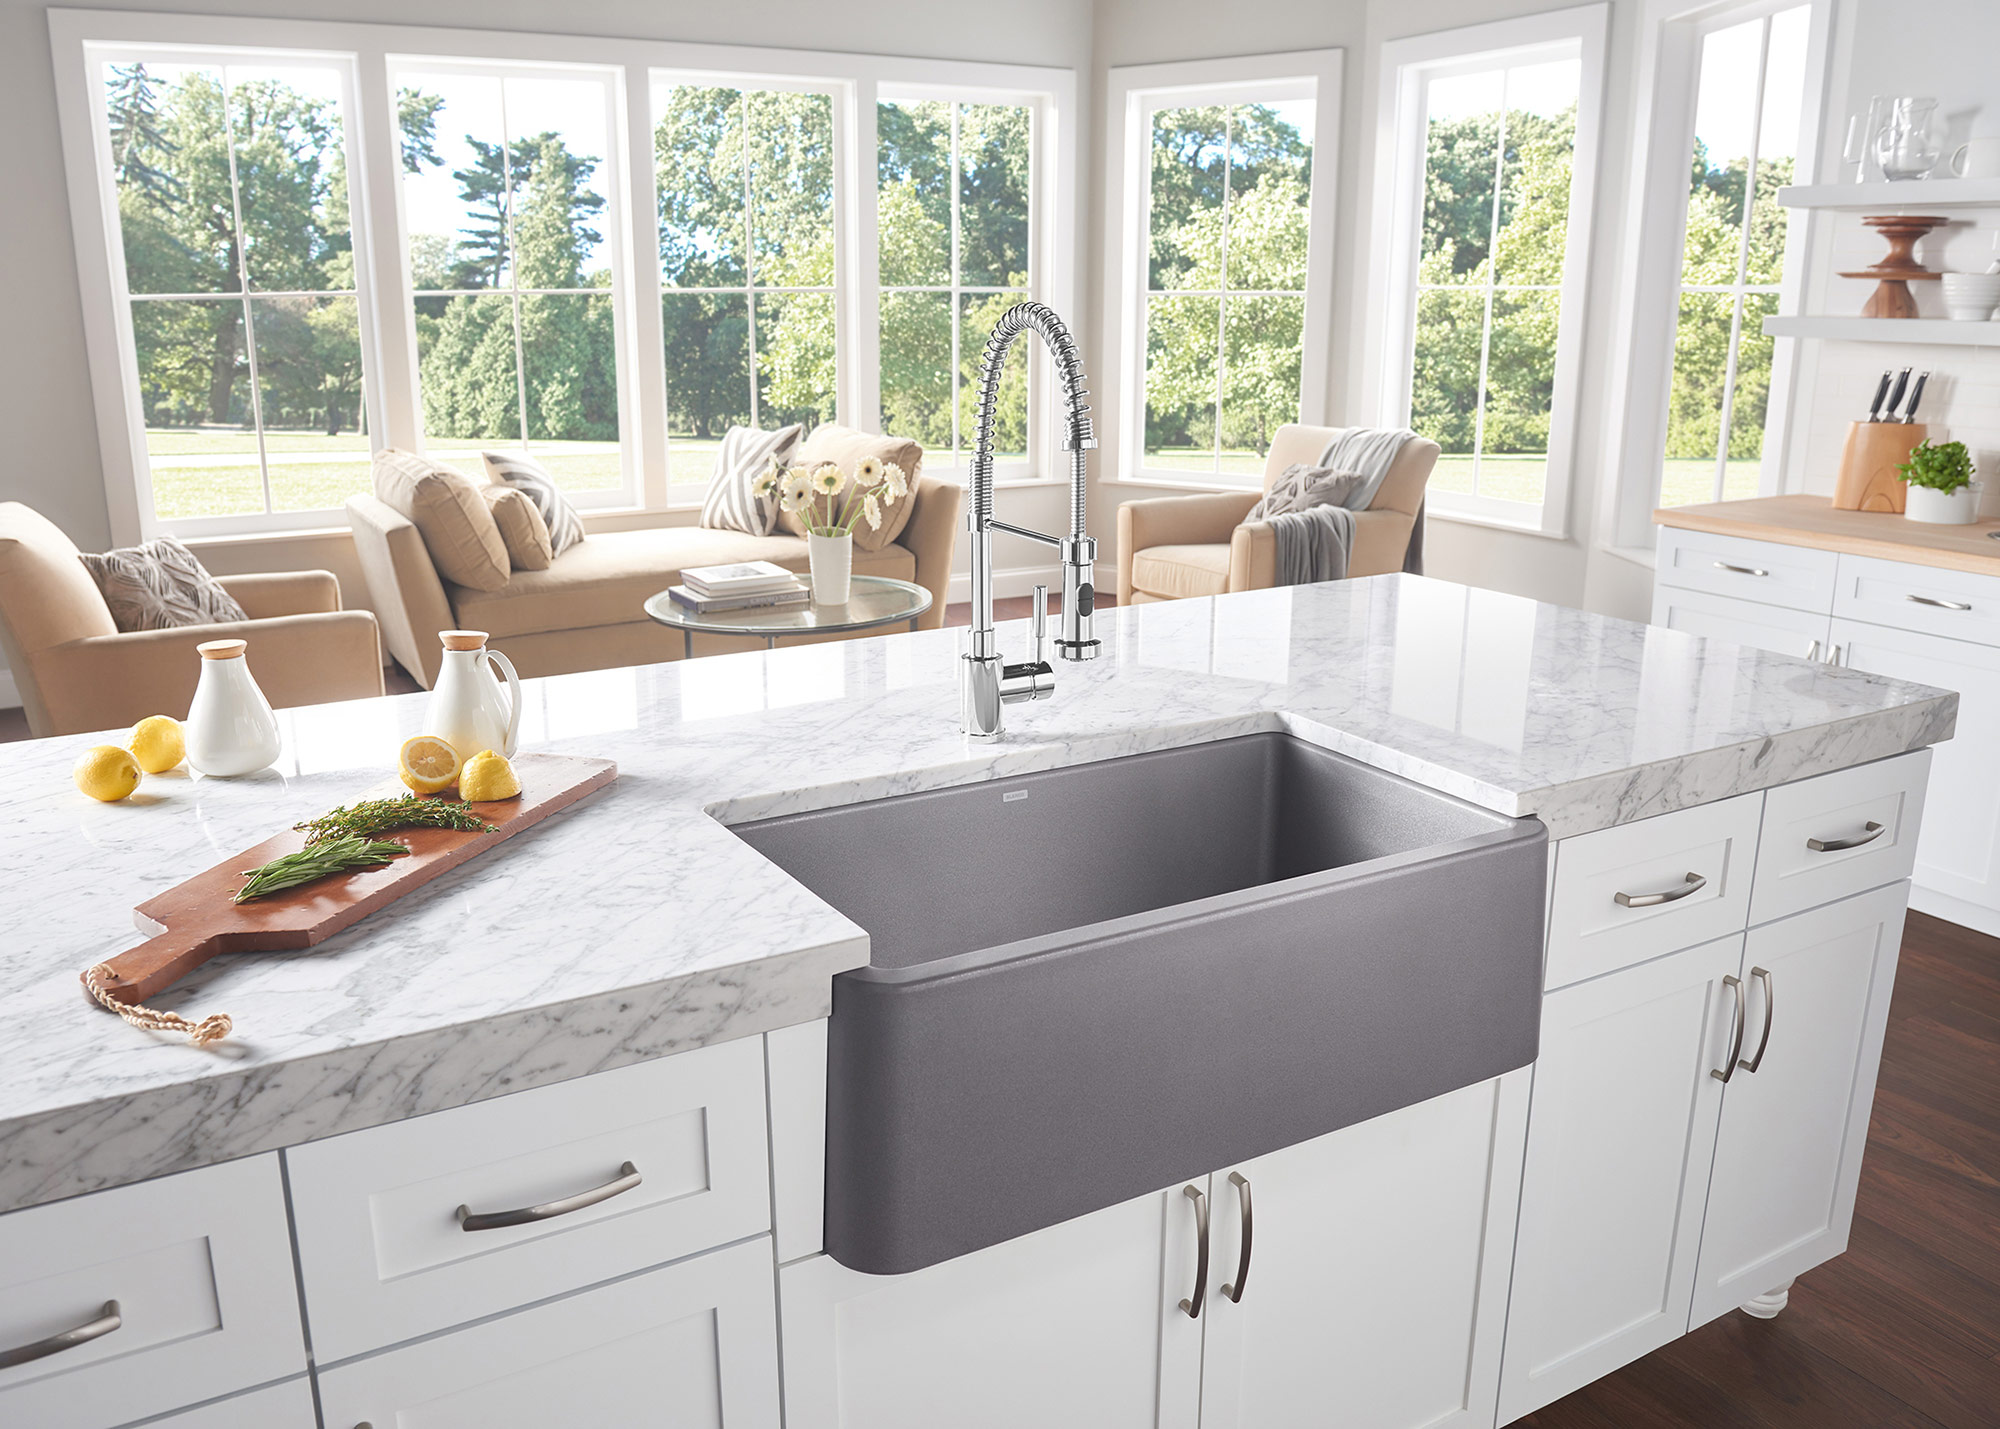 The apron front sink—a transitional country design style